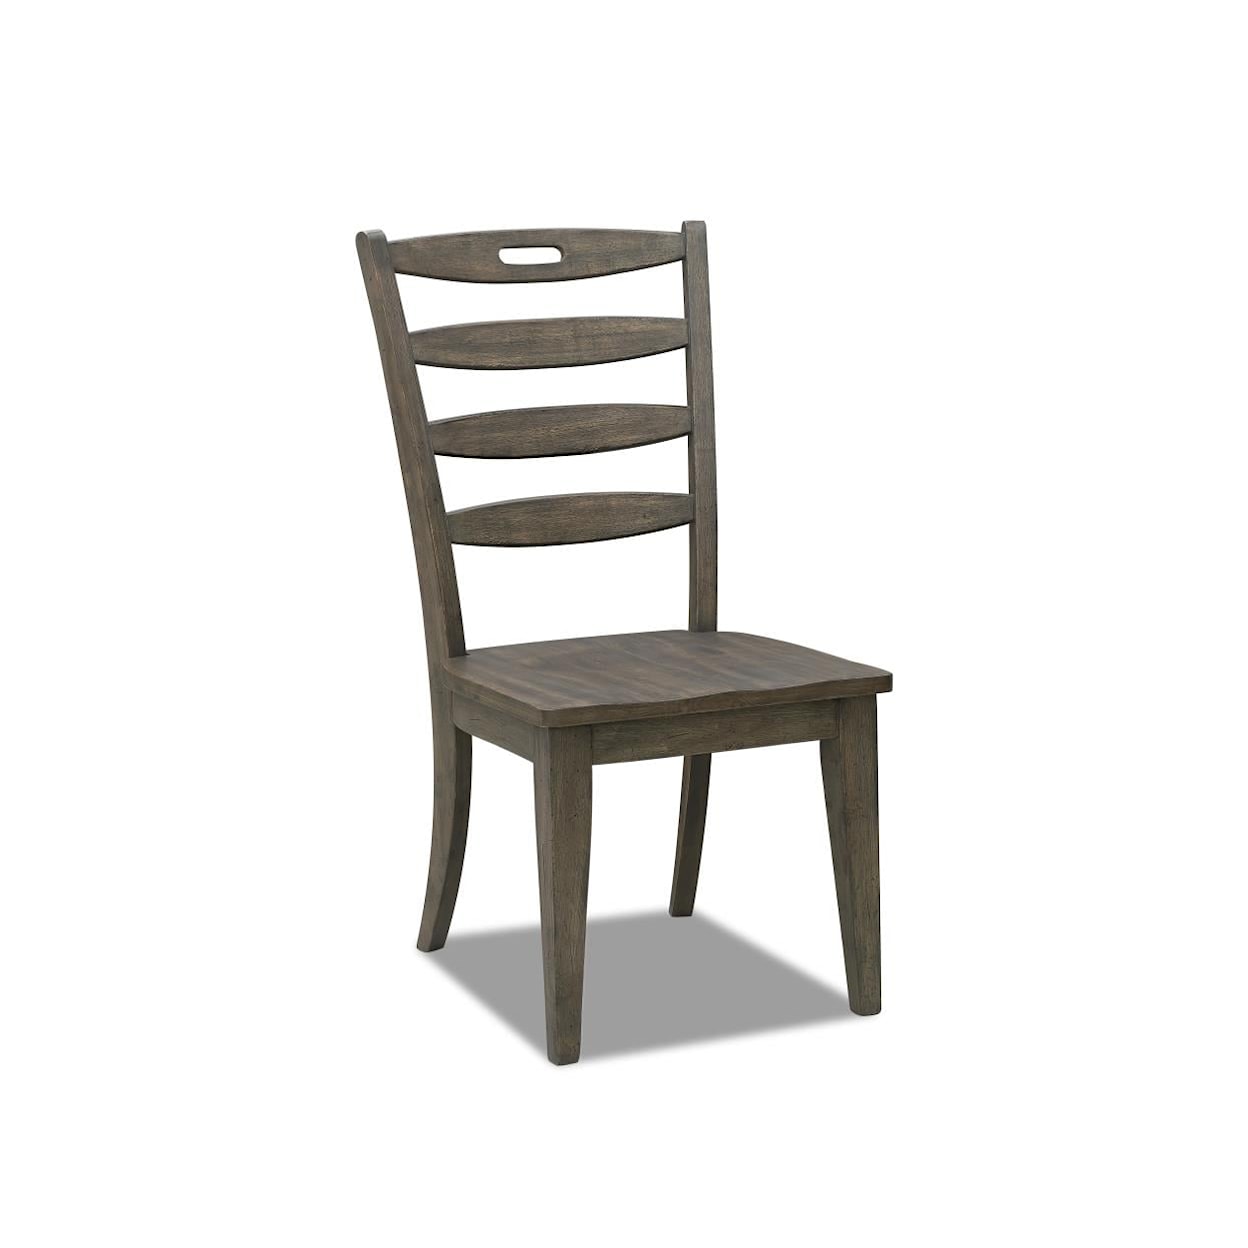 Trisha Yearwood Home Collection by Legacy Classic Hometown Ladder Back Side Chair